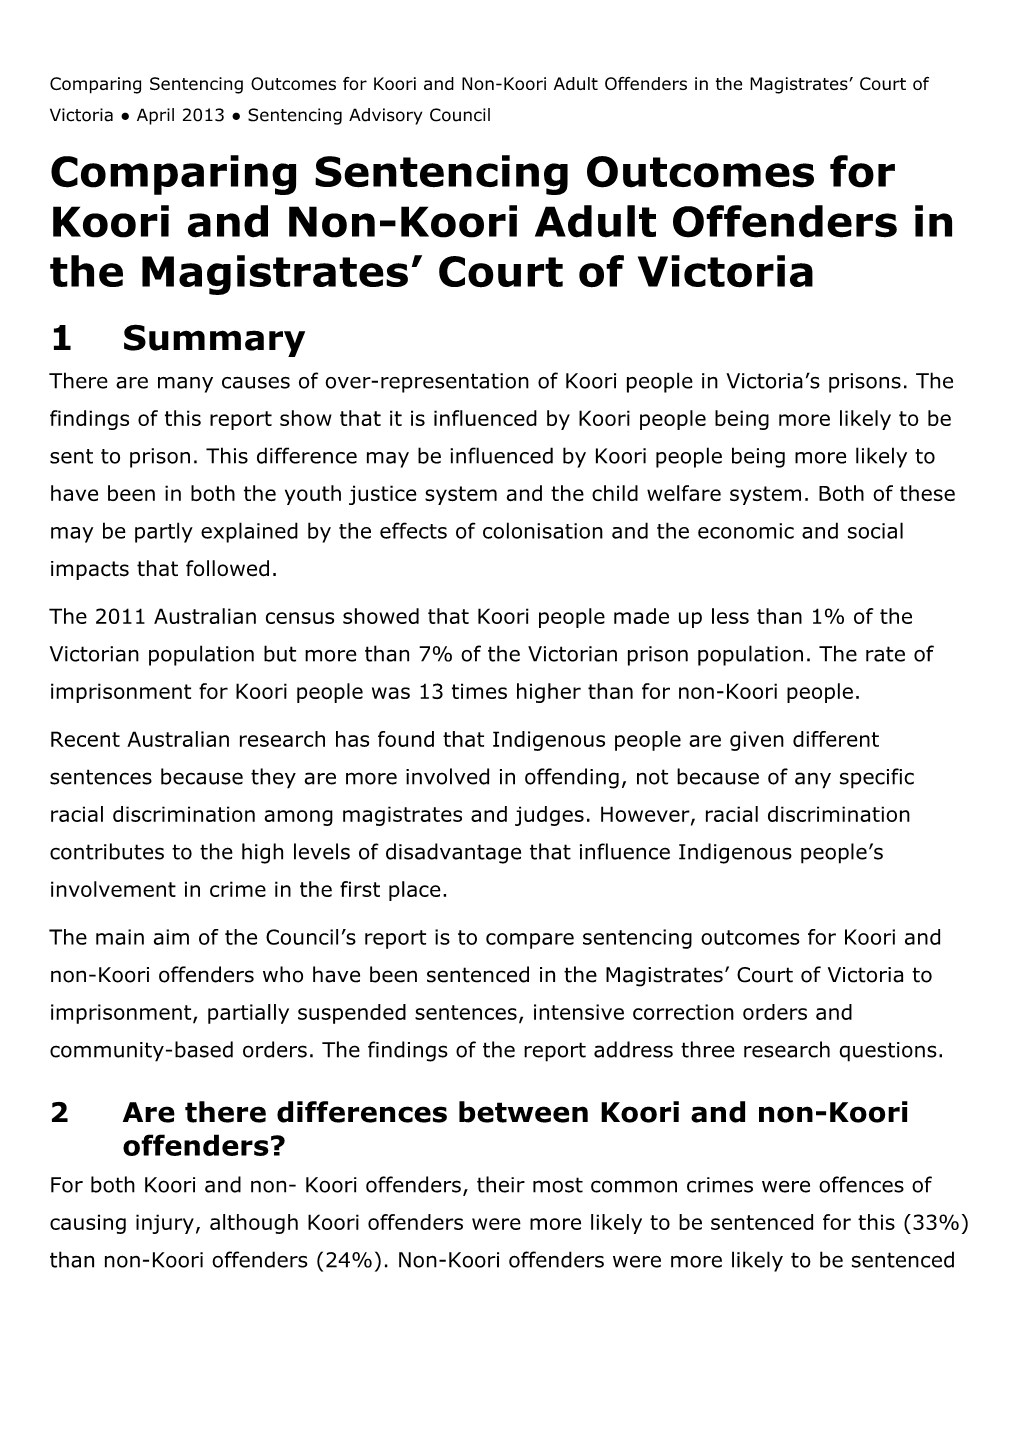 Comparing Sentencing Outcomes for Koori and Non-Koori Adult Offenders Summary